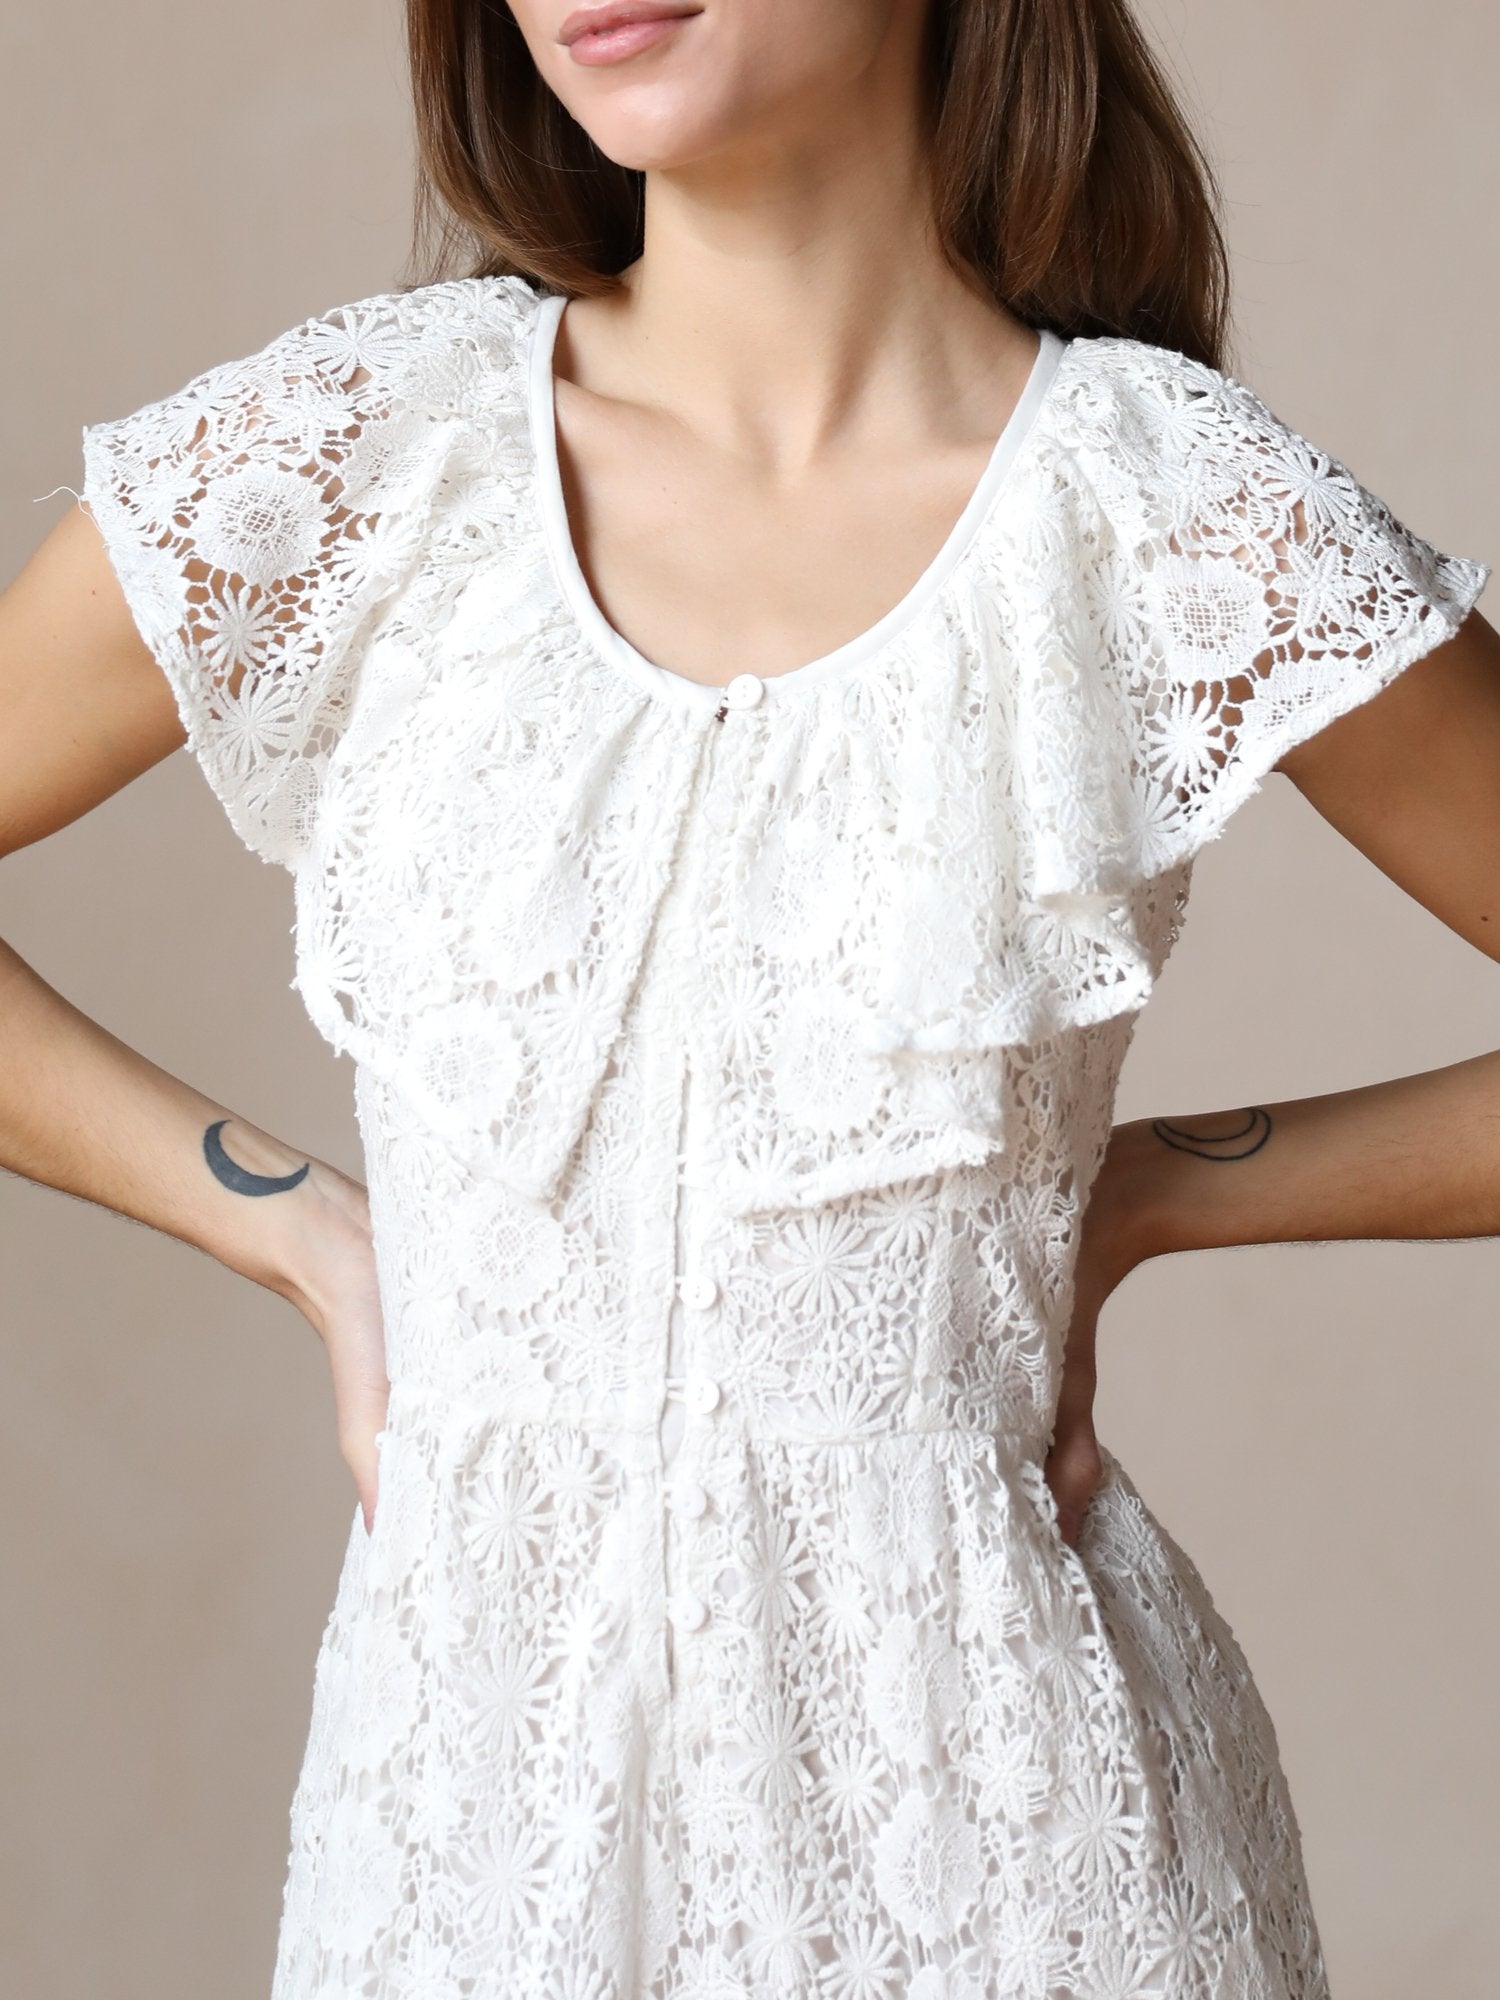 MILLE Clothing Mira Dress in Pearl Lace